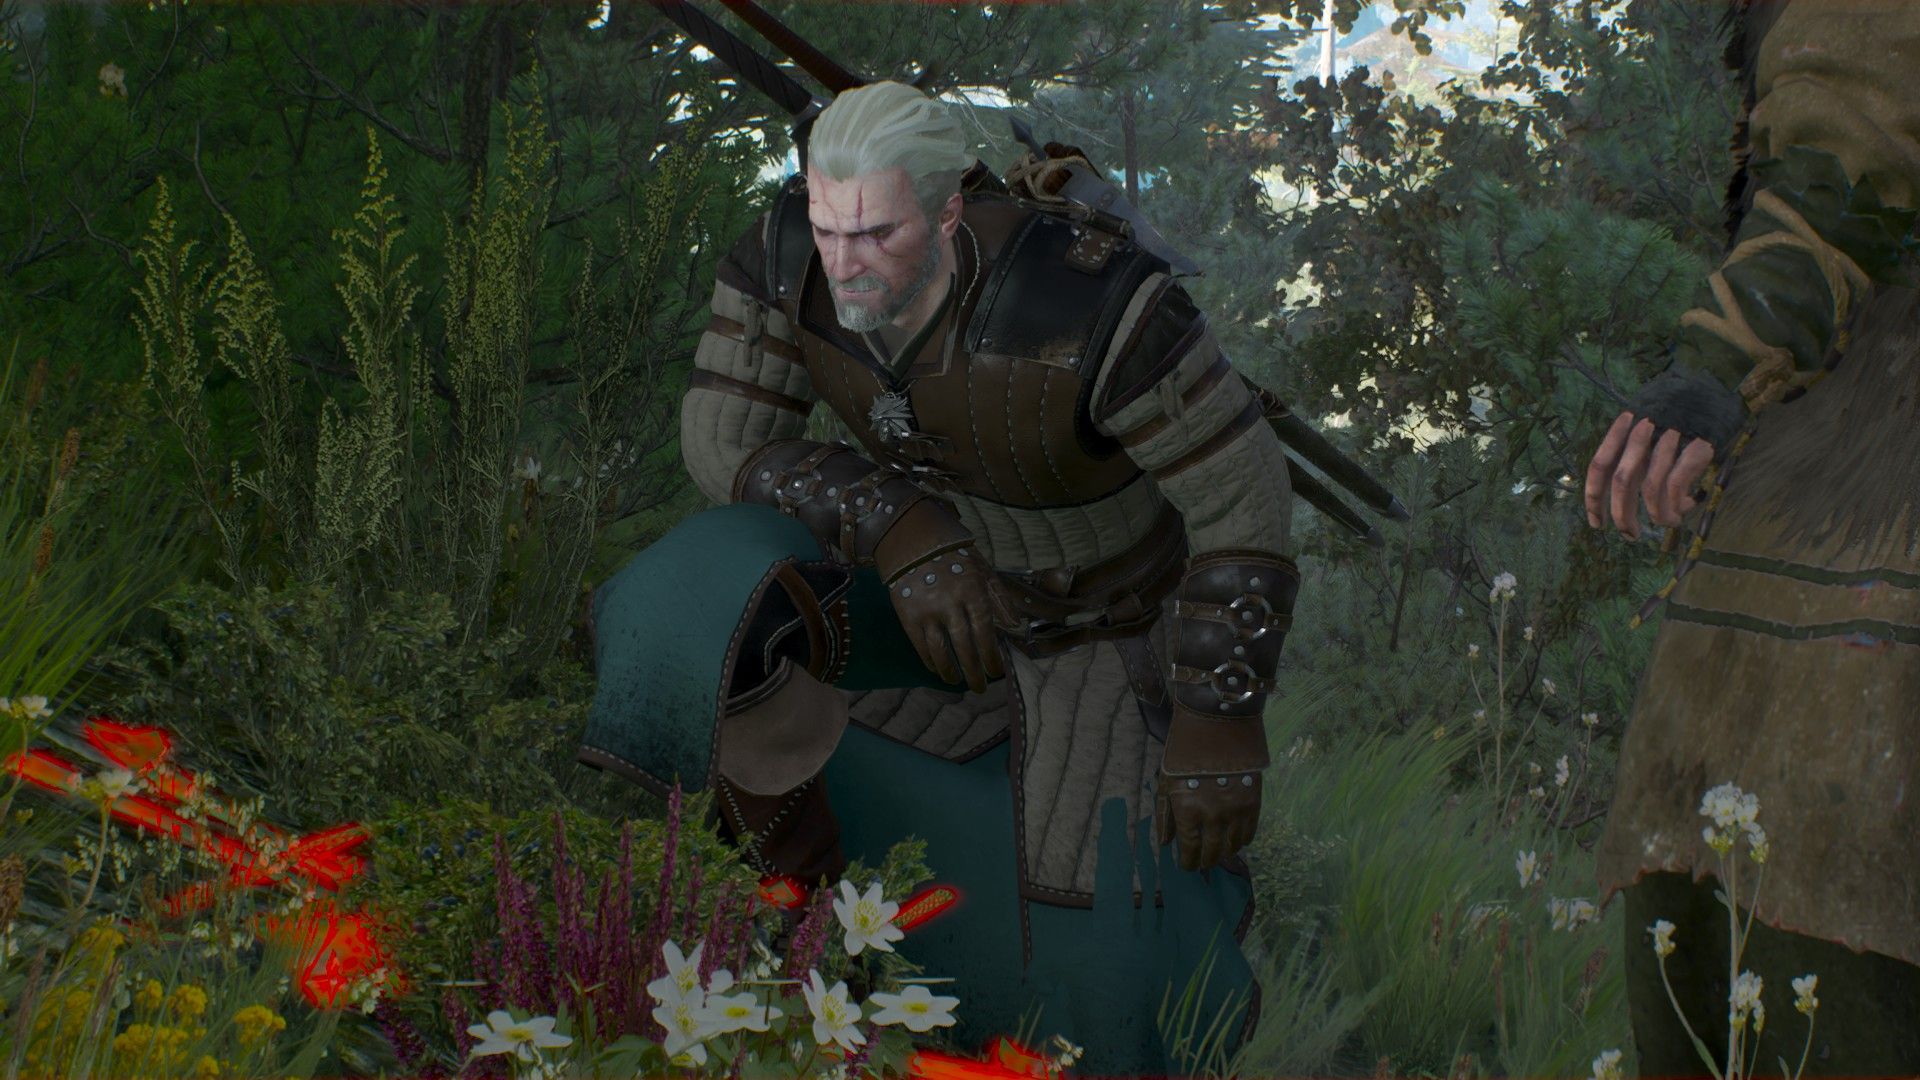 Geralt kneels examining the plants while another druid speaks to him in the Forest of Skellige.